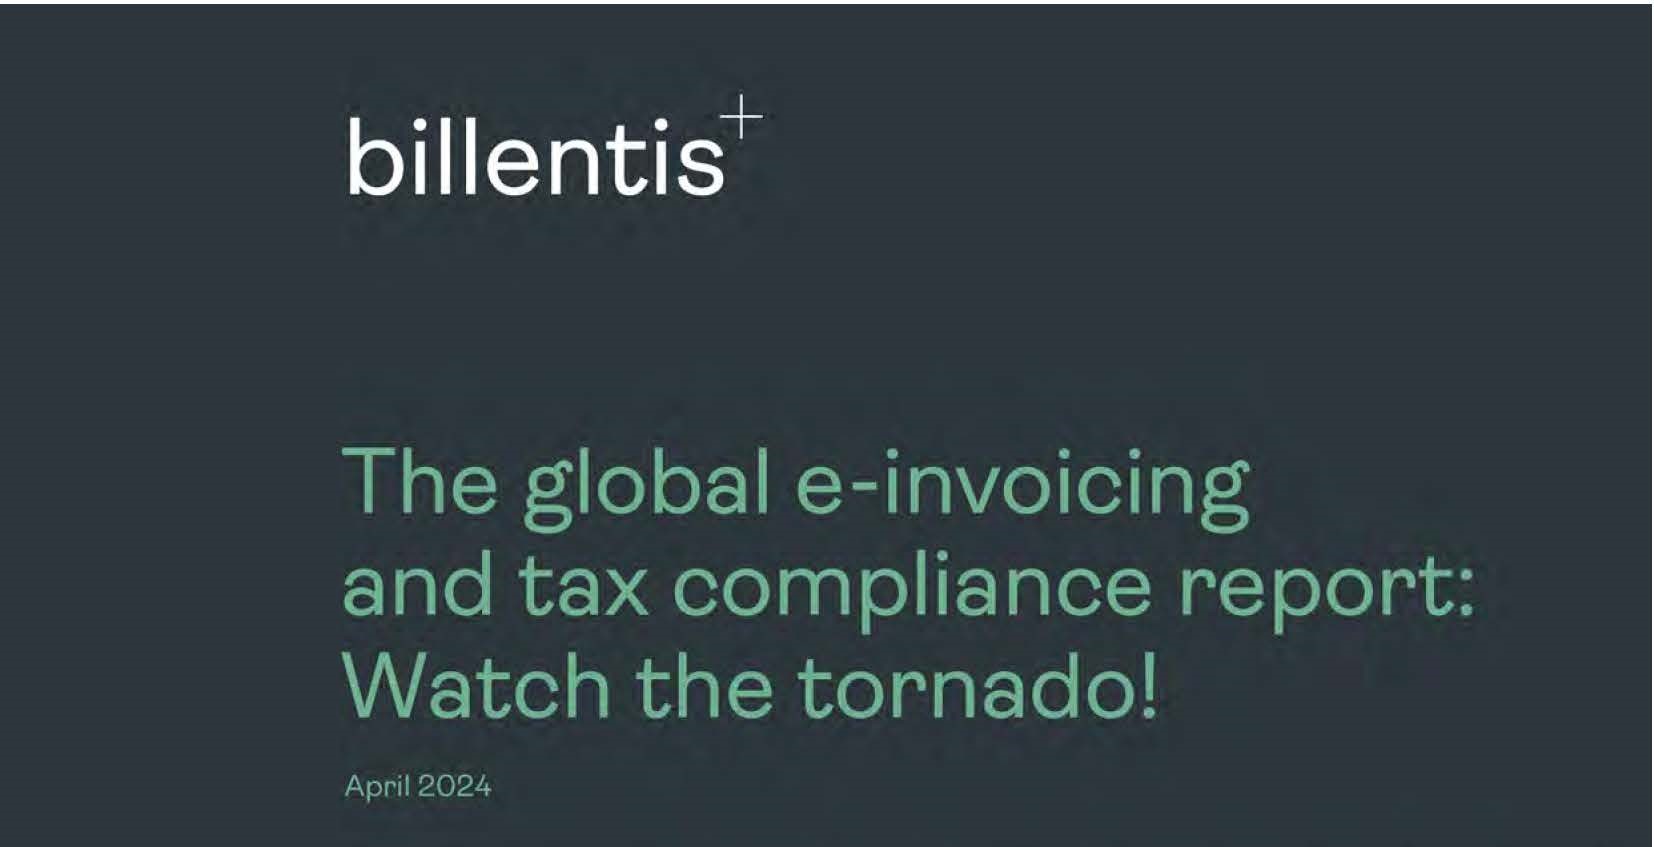 The global e-invoicing and tax compliance report 2024